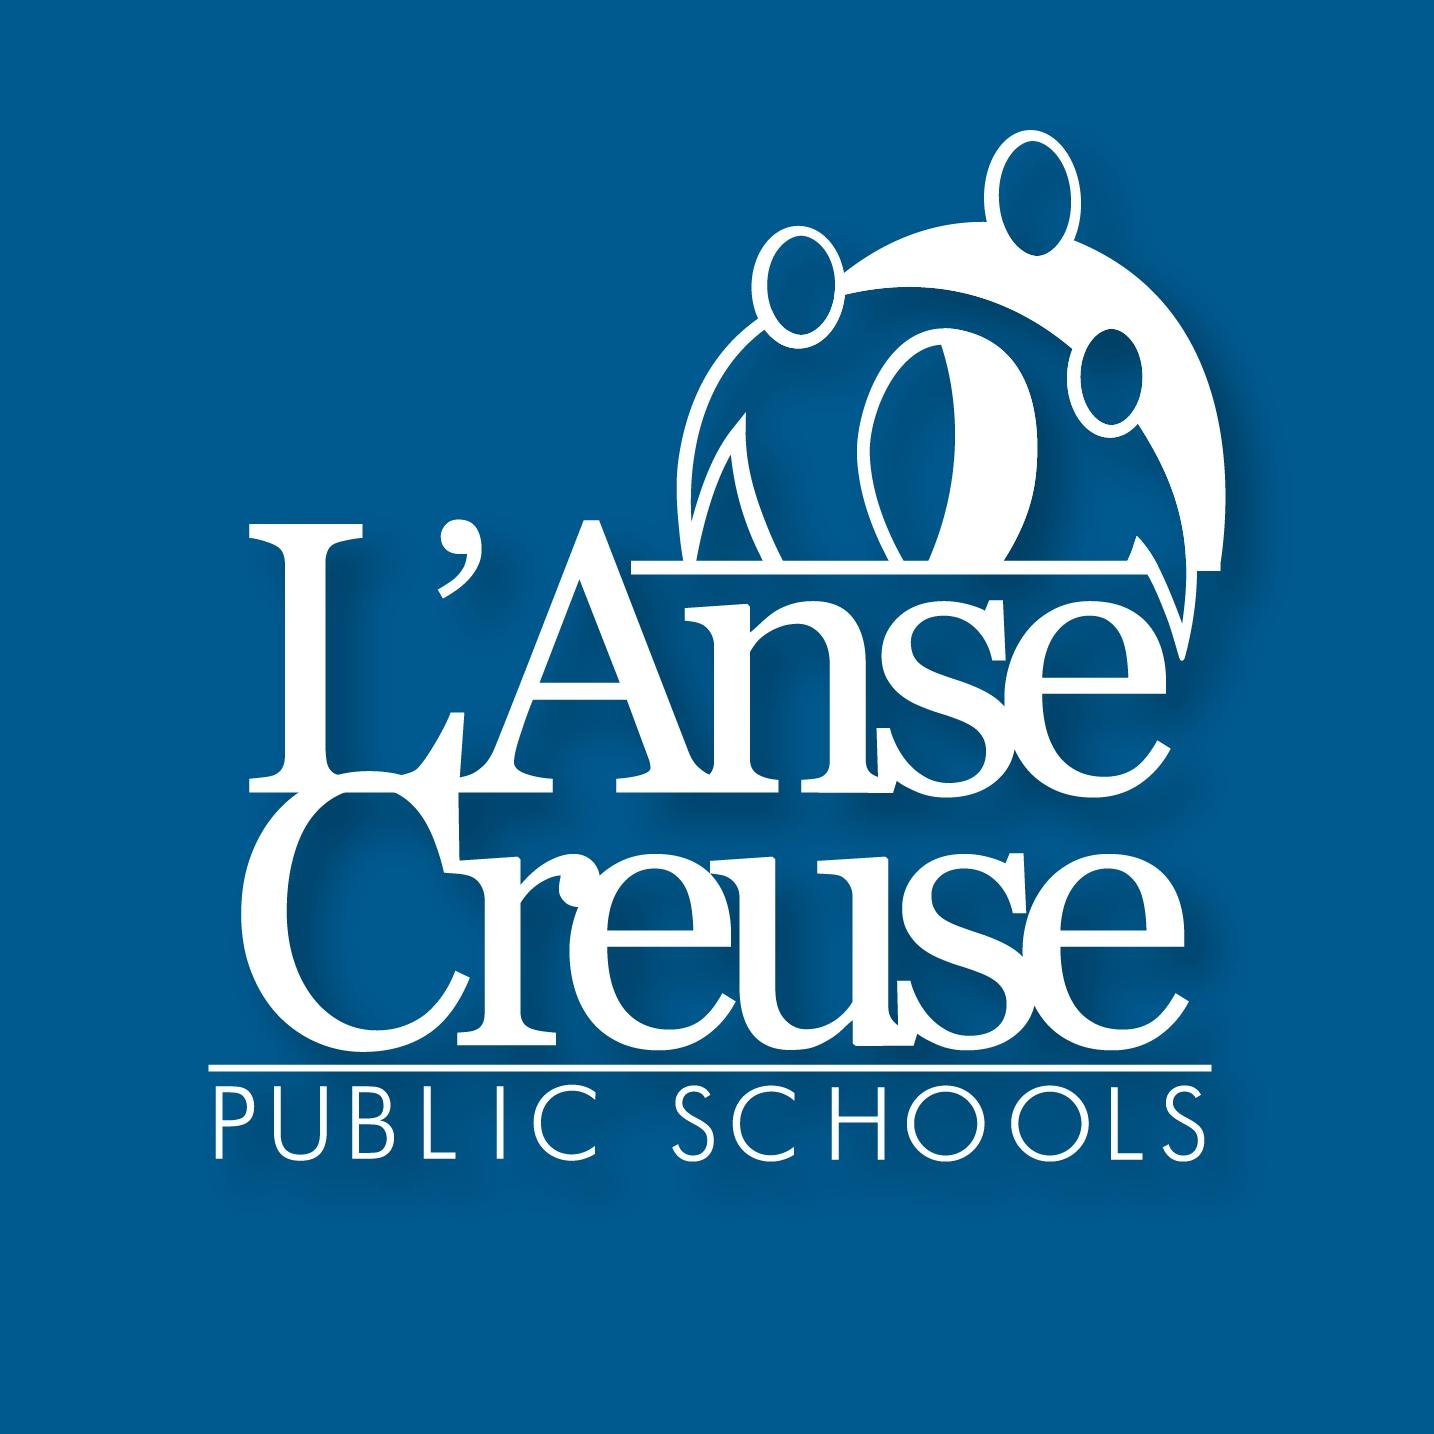 Sharing the incredible stories of our students, staff and community. #LivingLAnseCreuse